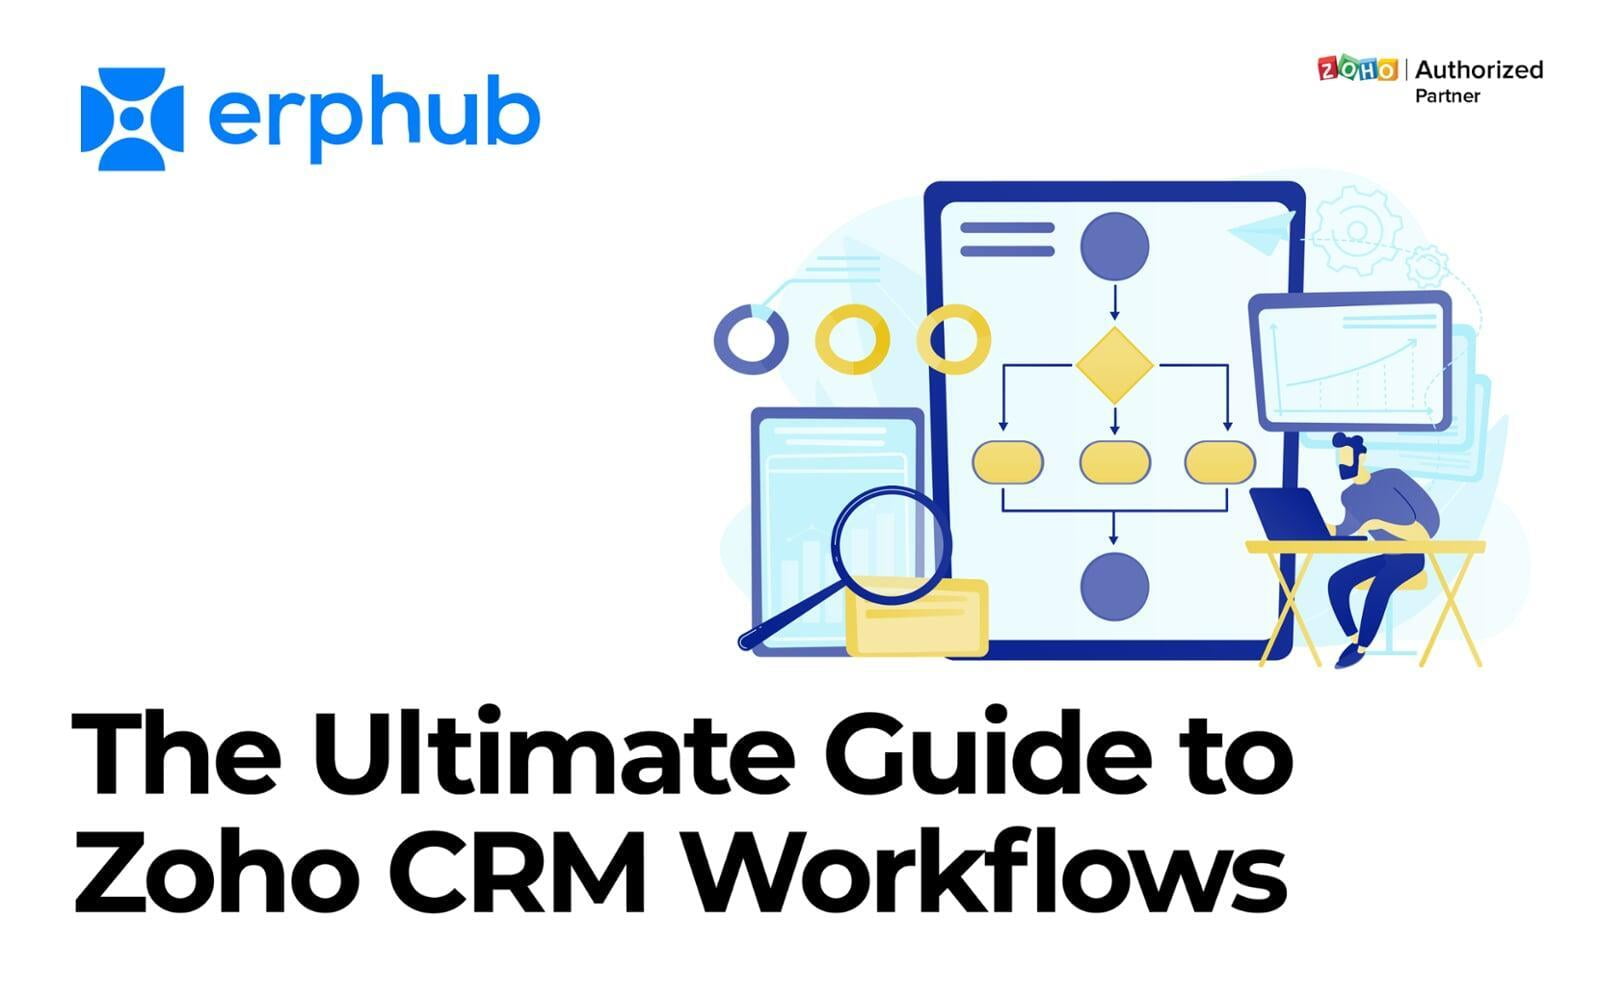 The Ultimate Guide to Zoho CRM Workflows: How to Make the Most of Your CRM